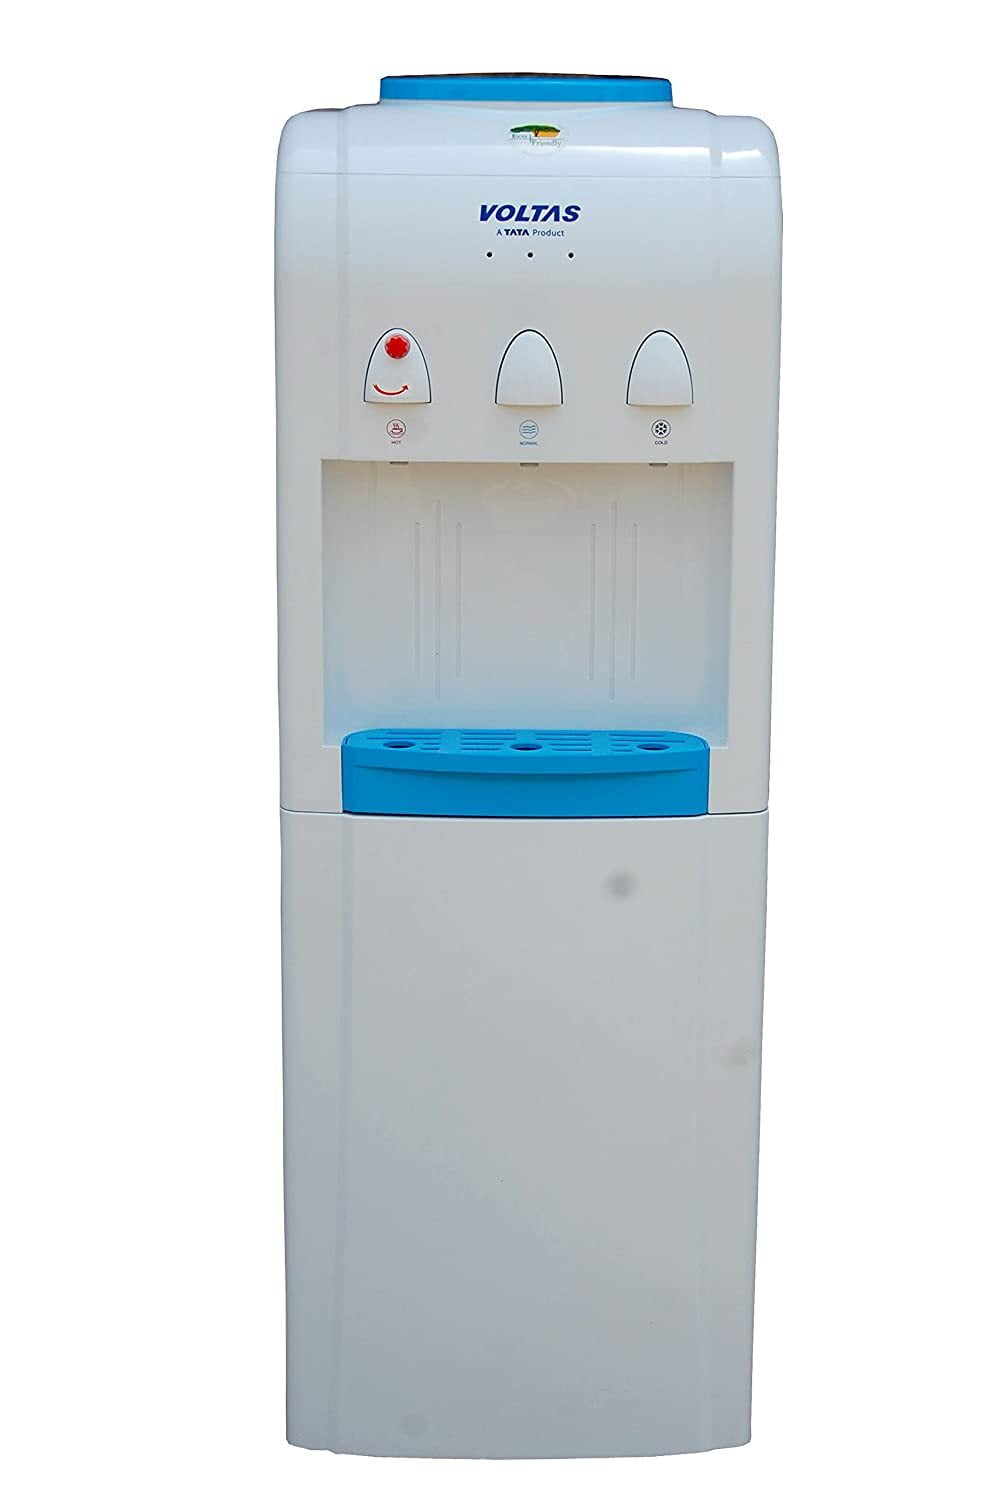 Voltas Pure-R 500 Watts Water Dispenser with Ref On Dillimall.Com